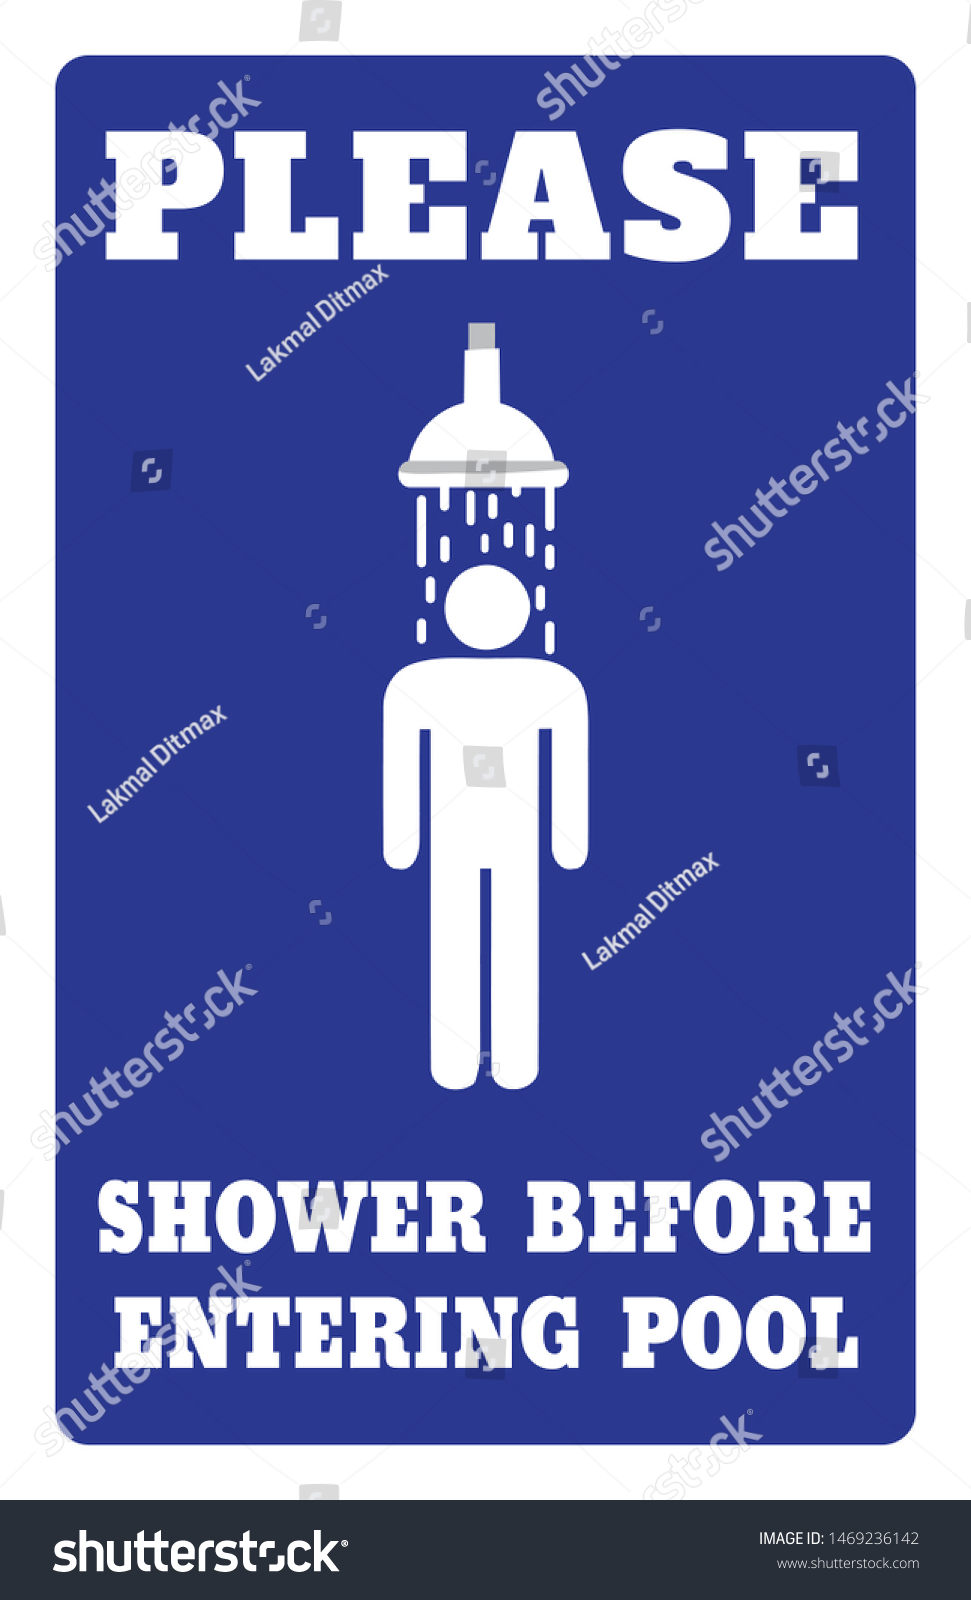 Please Shower Before Entering Pool Sign Stock Vector Royalty Free 1469236142 Shutterstock